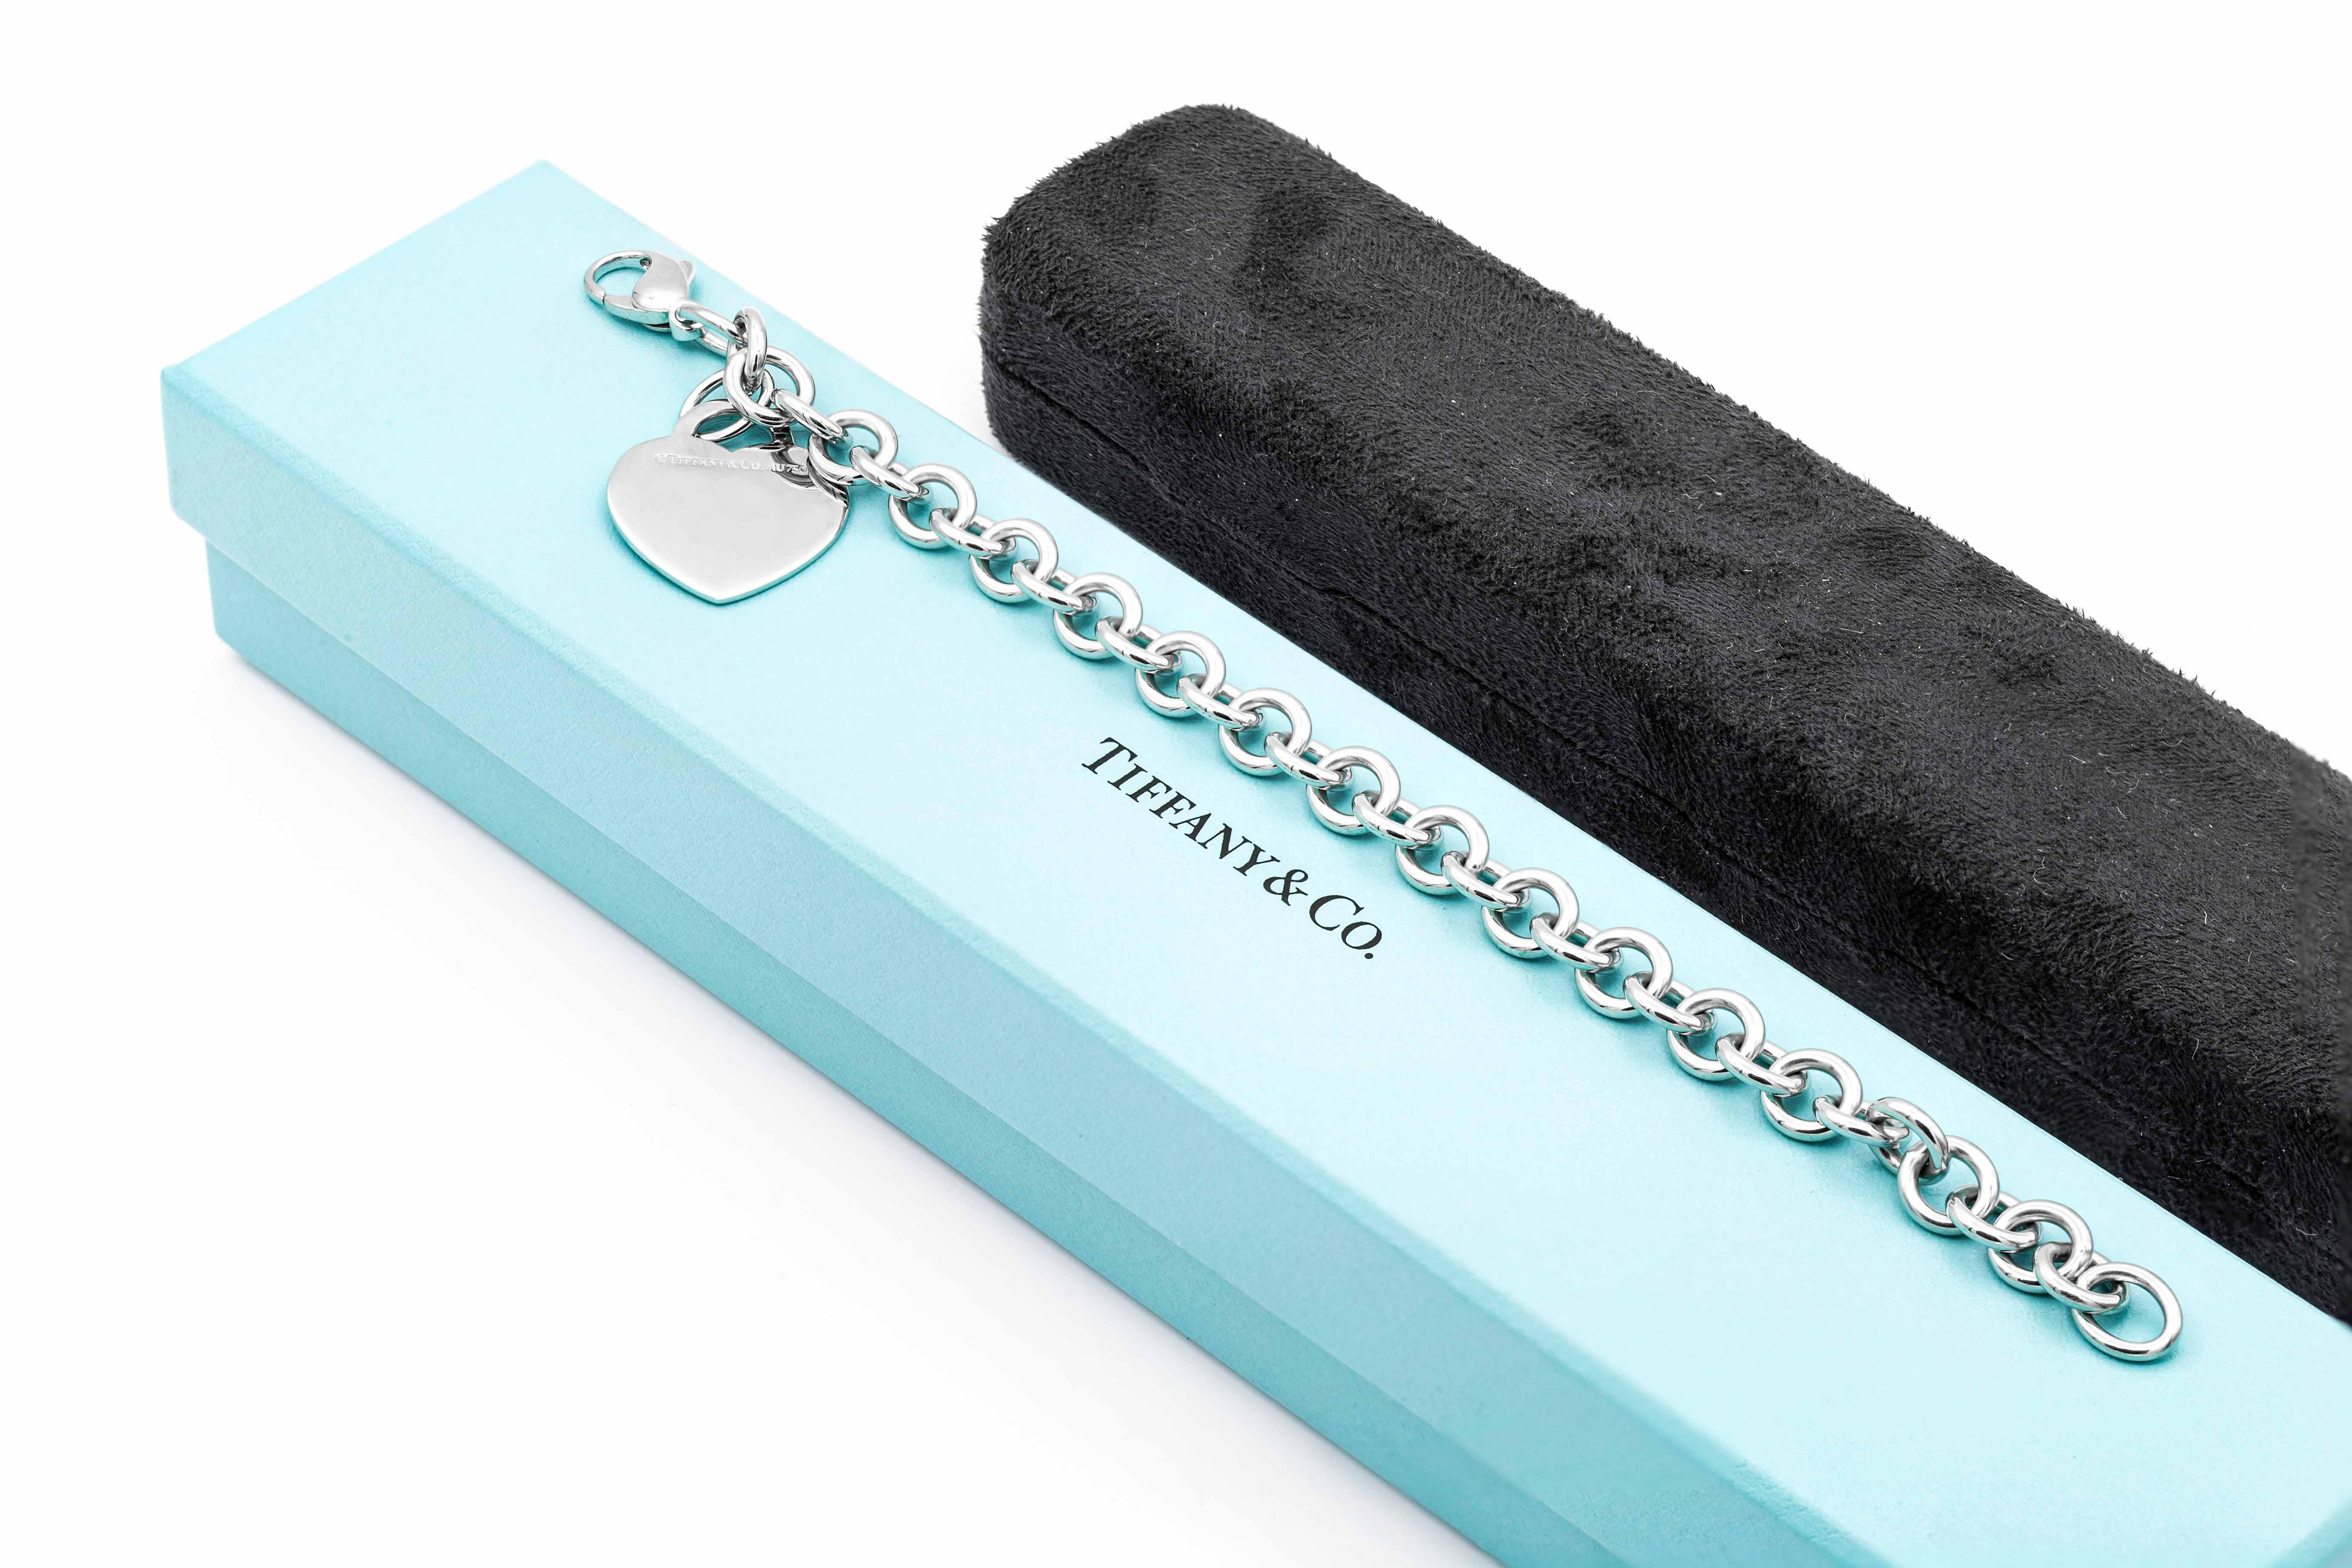 Tiffany & Co. Return to Tiffany bracelet
SOLID 18K WHITE GOLD!!! w/ diamonds in the Heart charm (0.15ct)
29.7grm
7 inch long
Comes w/ original box
In excellent condition!